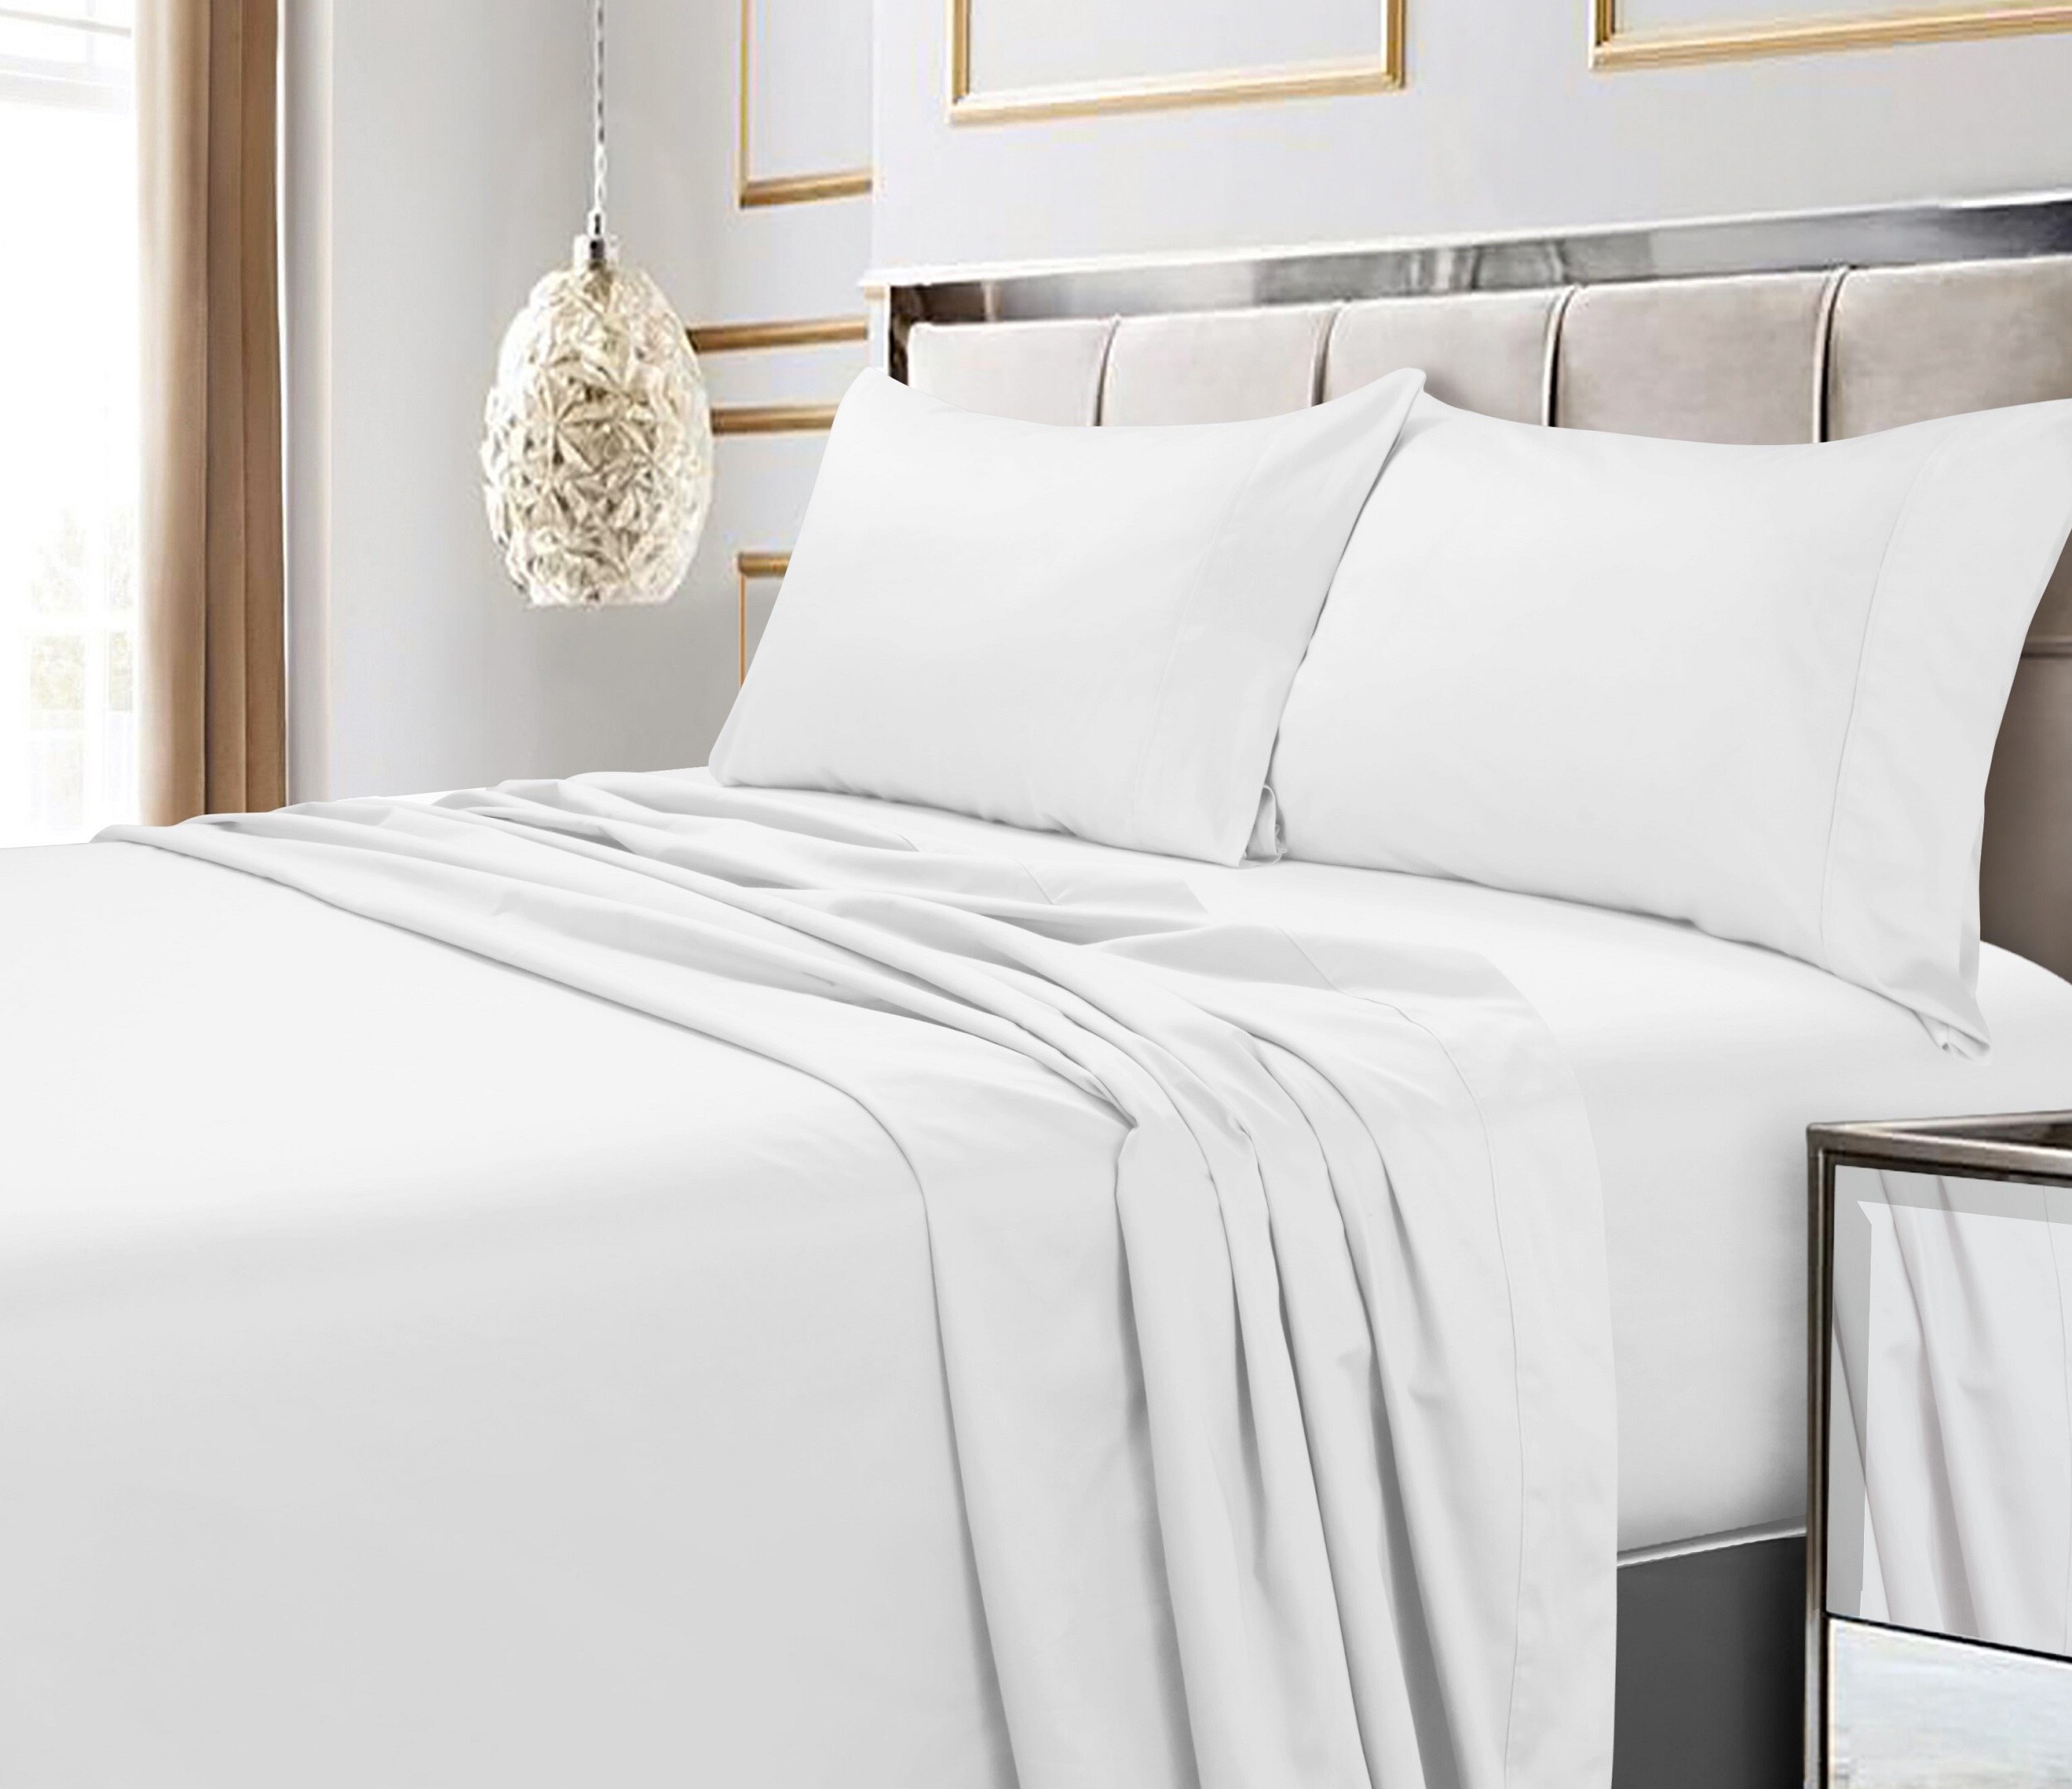 TRIBECA LIVING 600 4-Piece Set King 600-Thread-Count Cotton White Bed-Sheet in the Bed Sheets department at Lowes.com